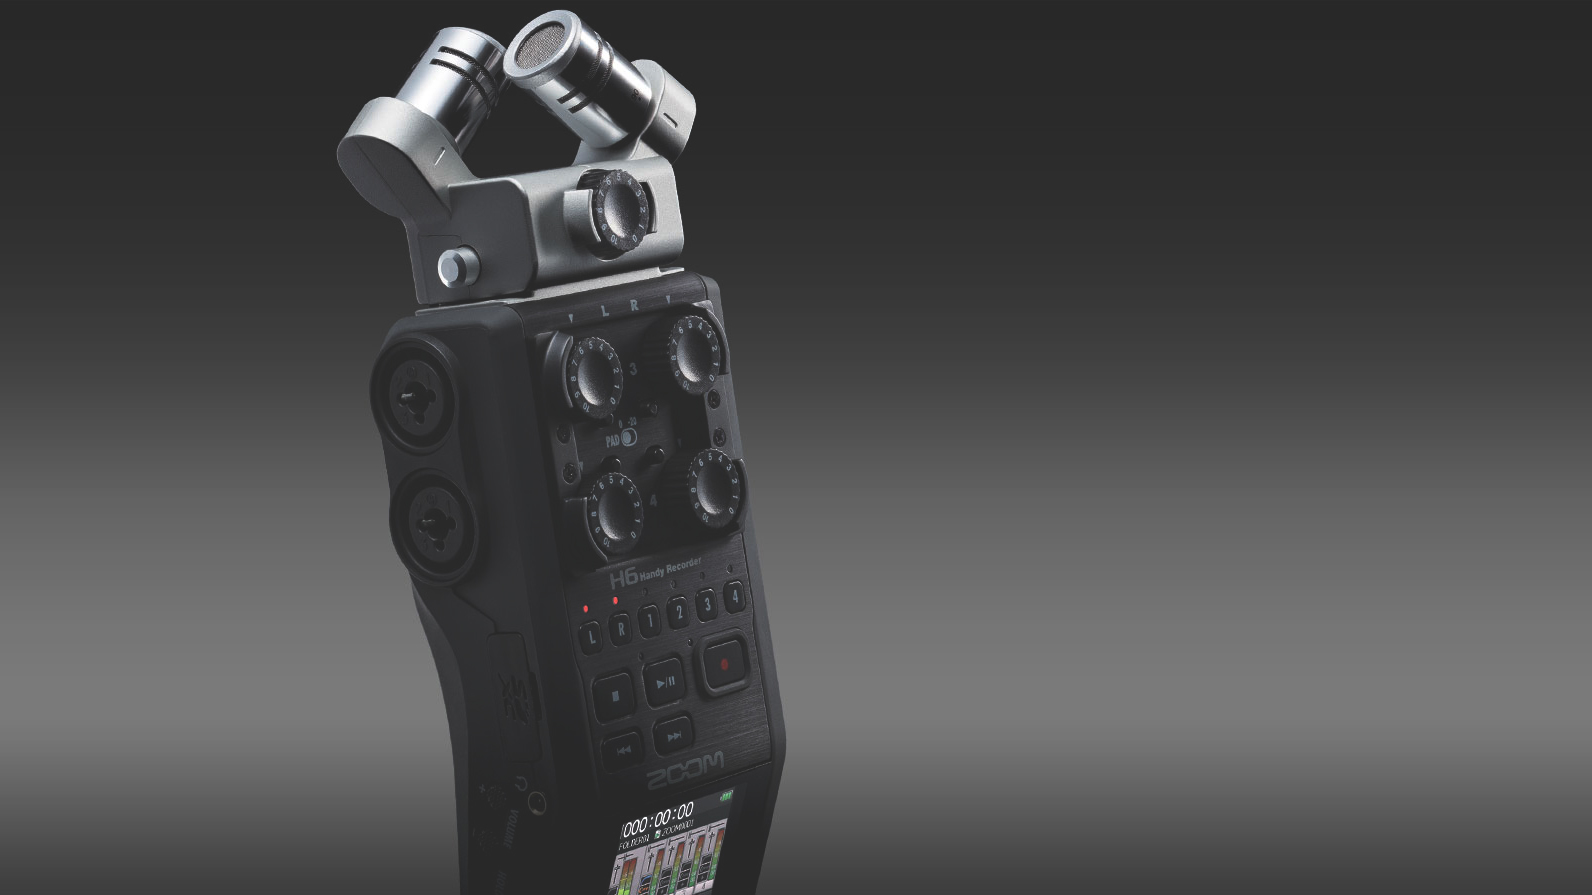 The Zoom H6 Digital Recorder